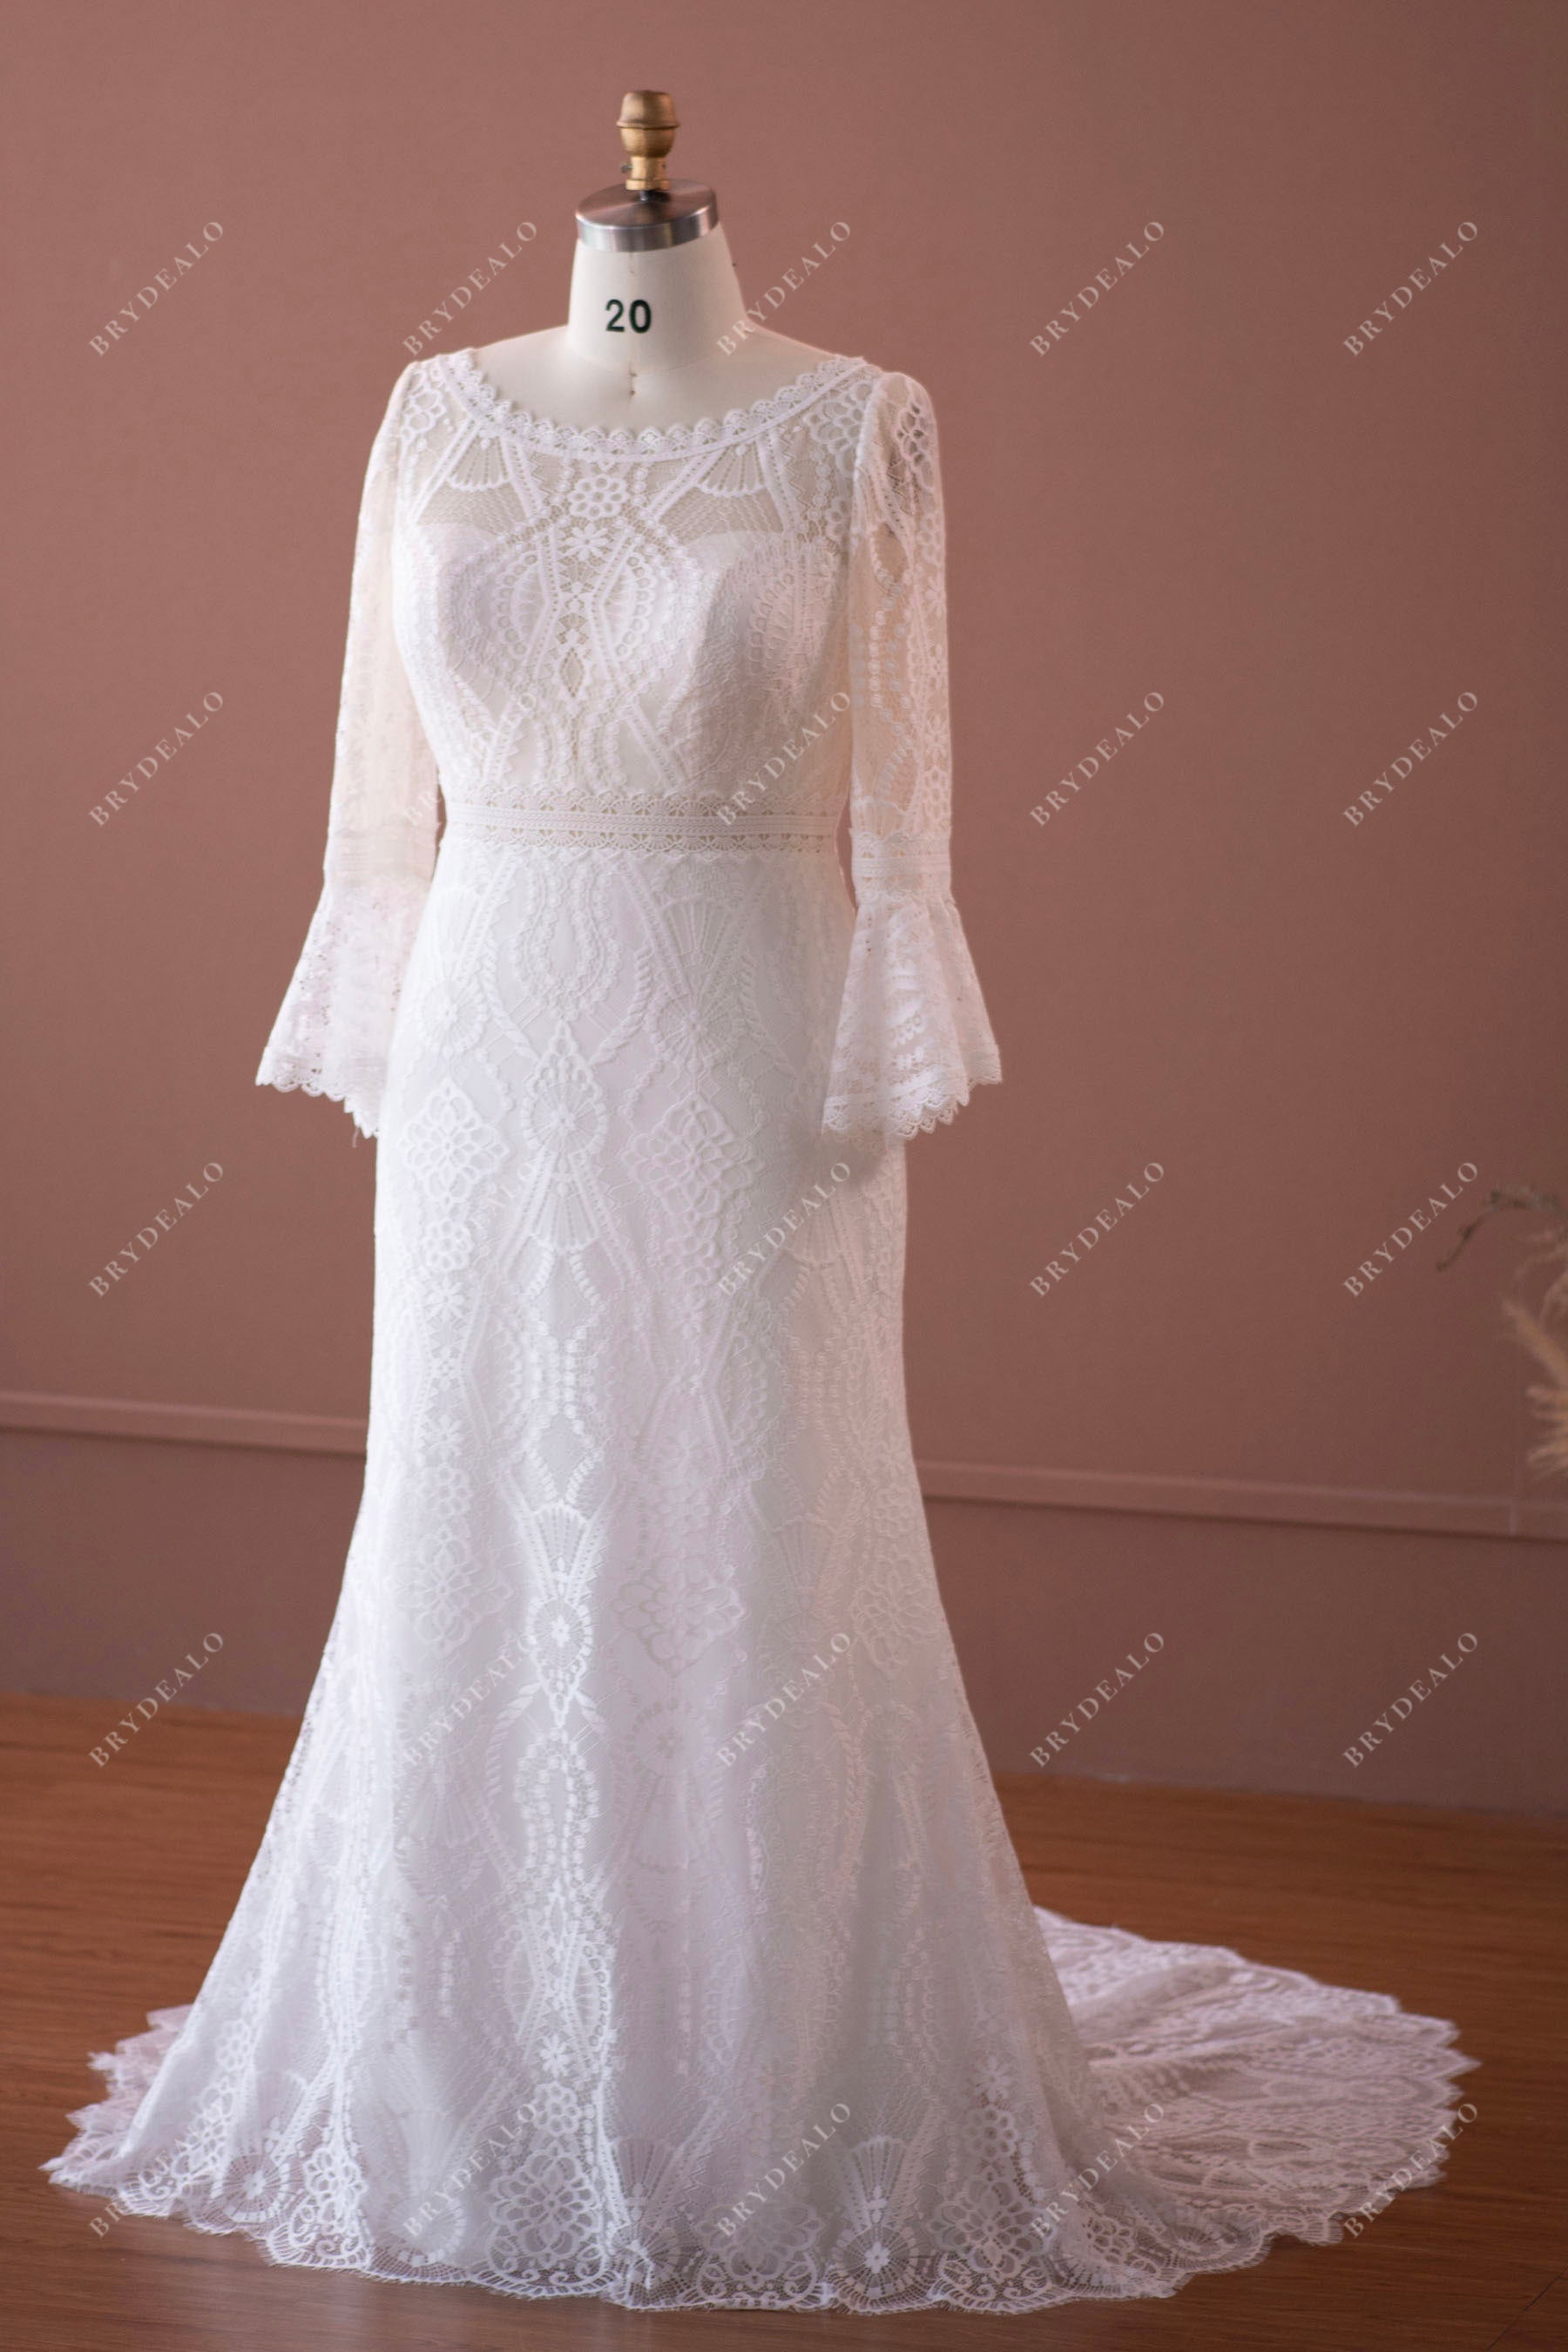 sheer bell sleeves fit and flare spring bridal dress